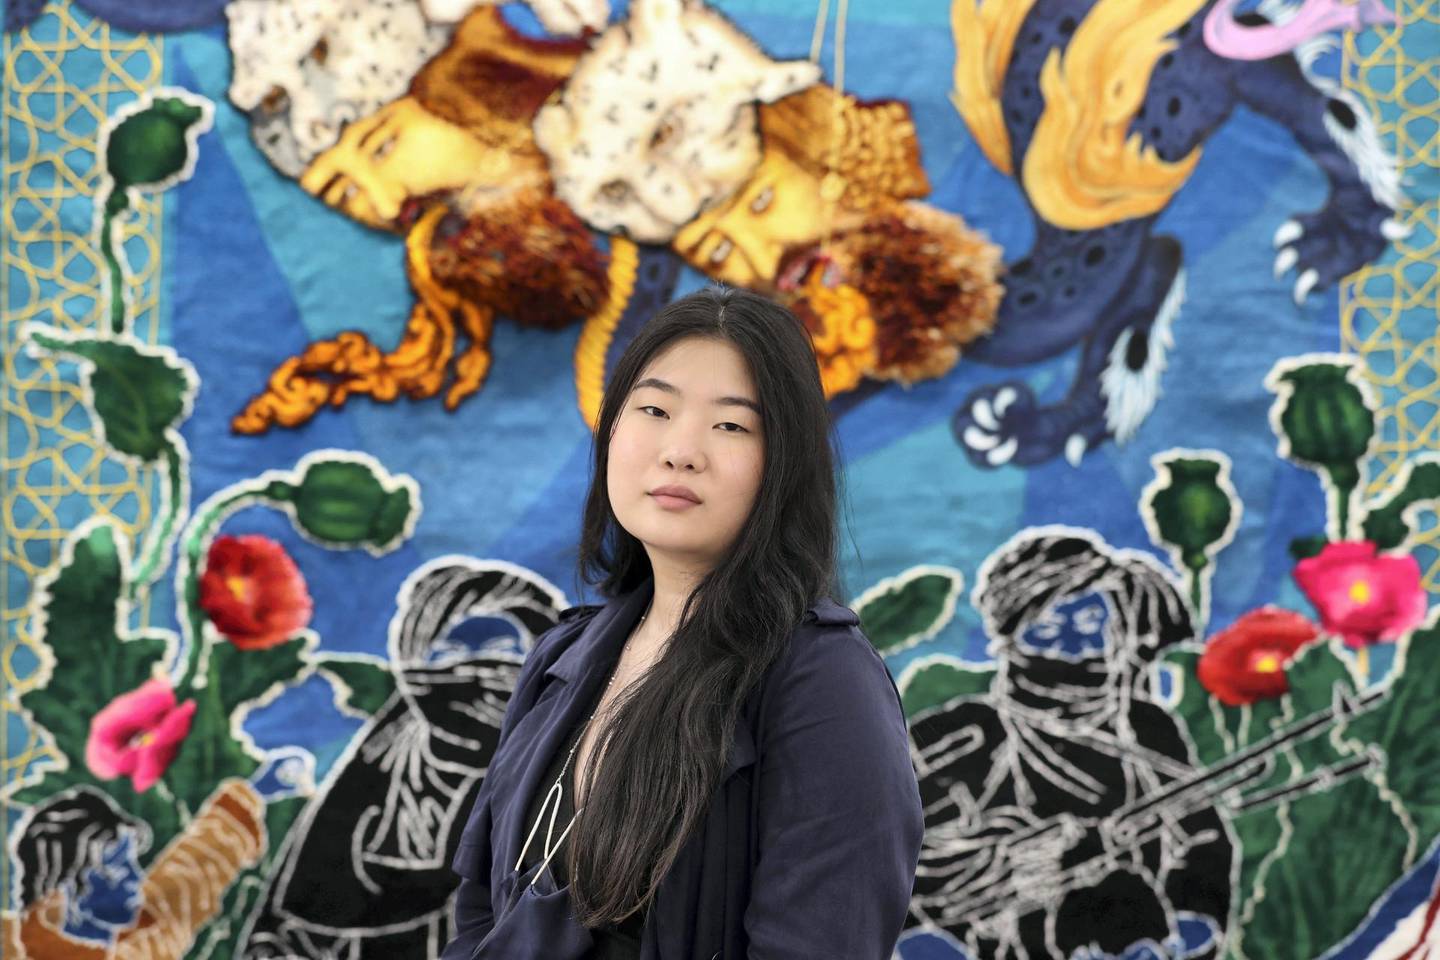 Dubai, United Arab Emirates - Reporter: Alexandra Chaves. Arts and Lifestyle. Erica Kyung from Aiconart, New York. Art Dubai 2021 opens at the DIFC. Tuesday, March 30th, 2021. Dubai. Chris Whiteoak / The National